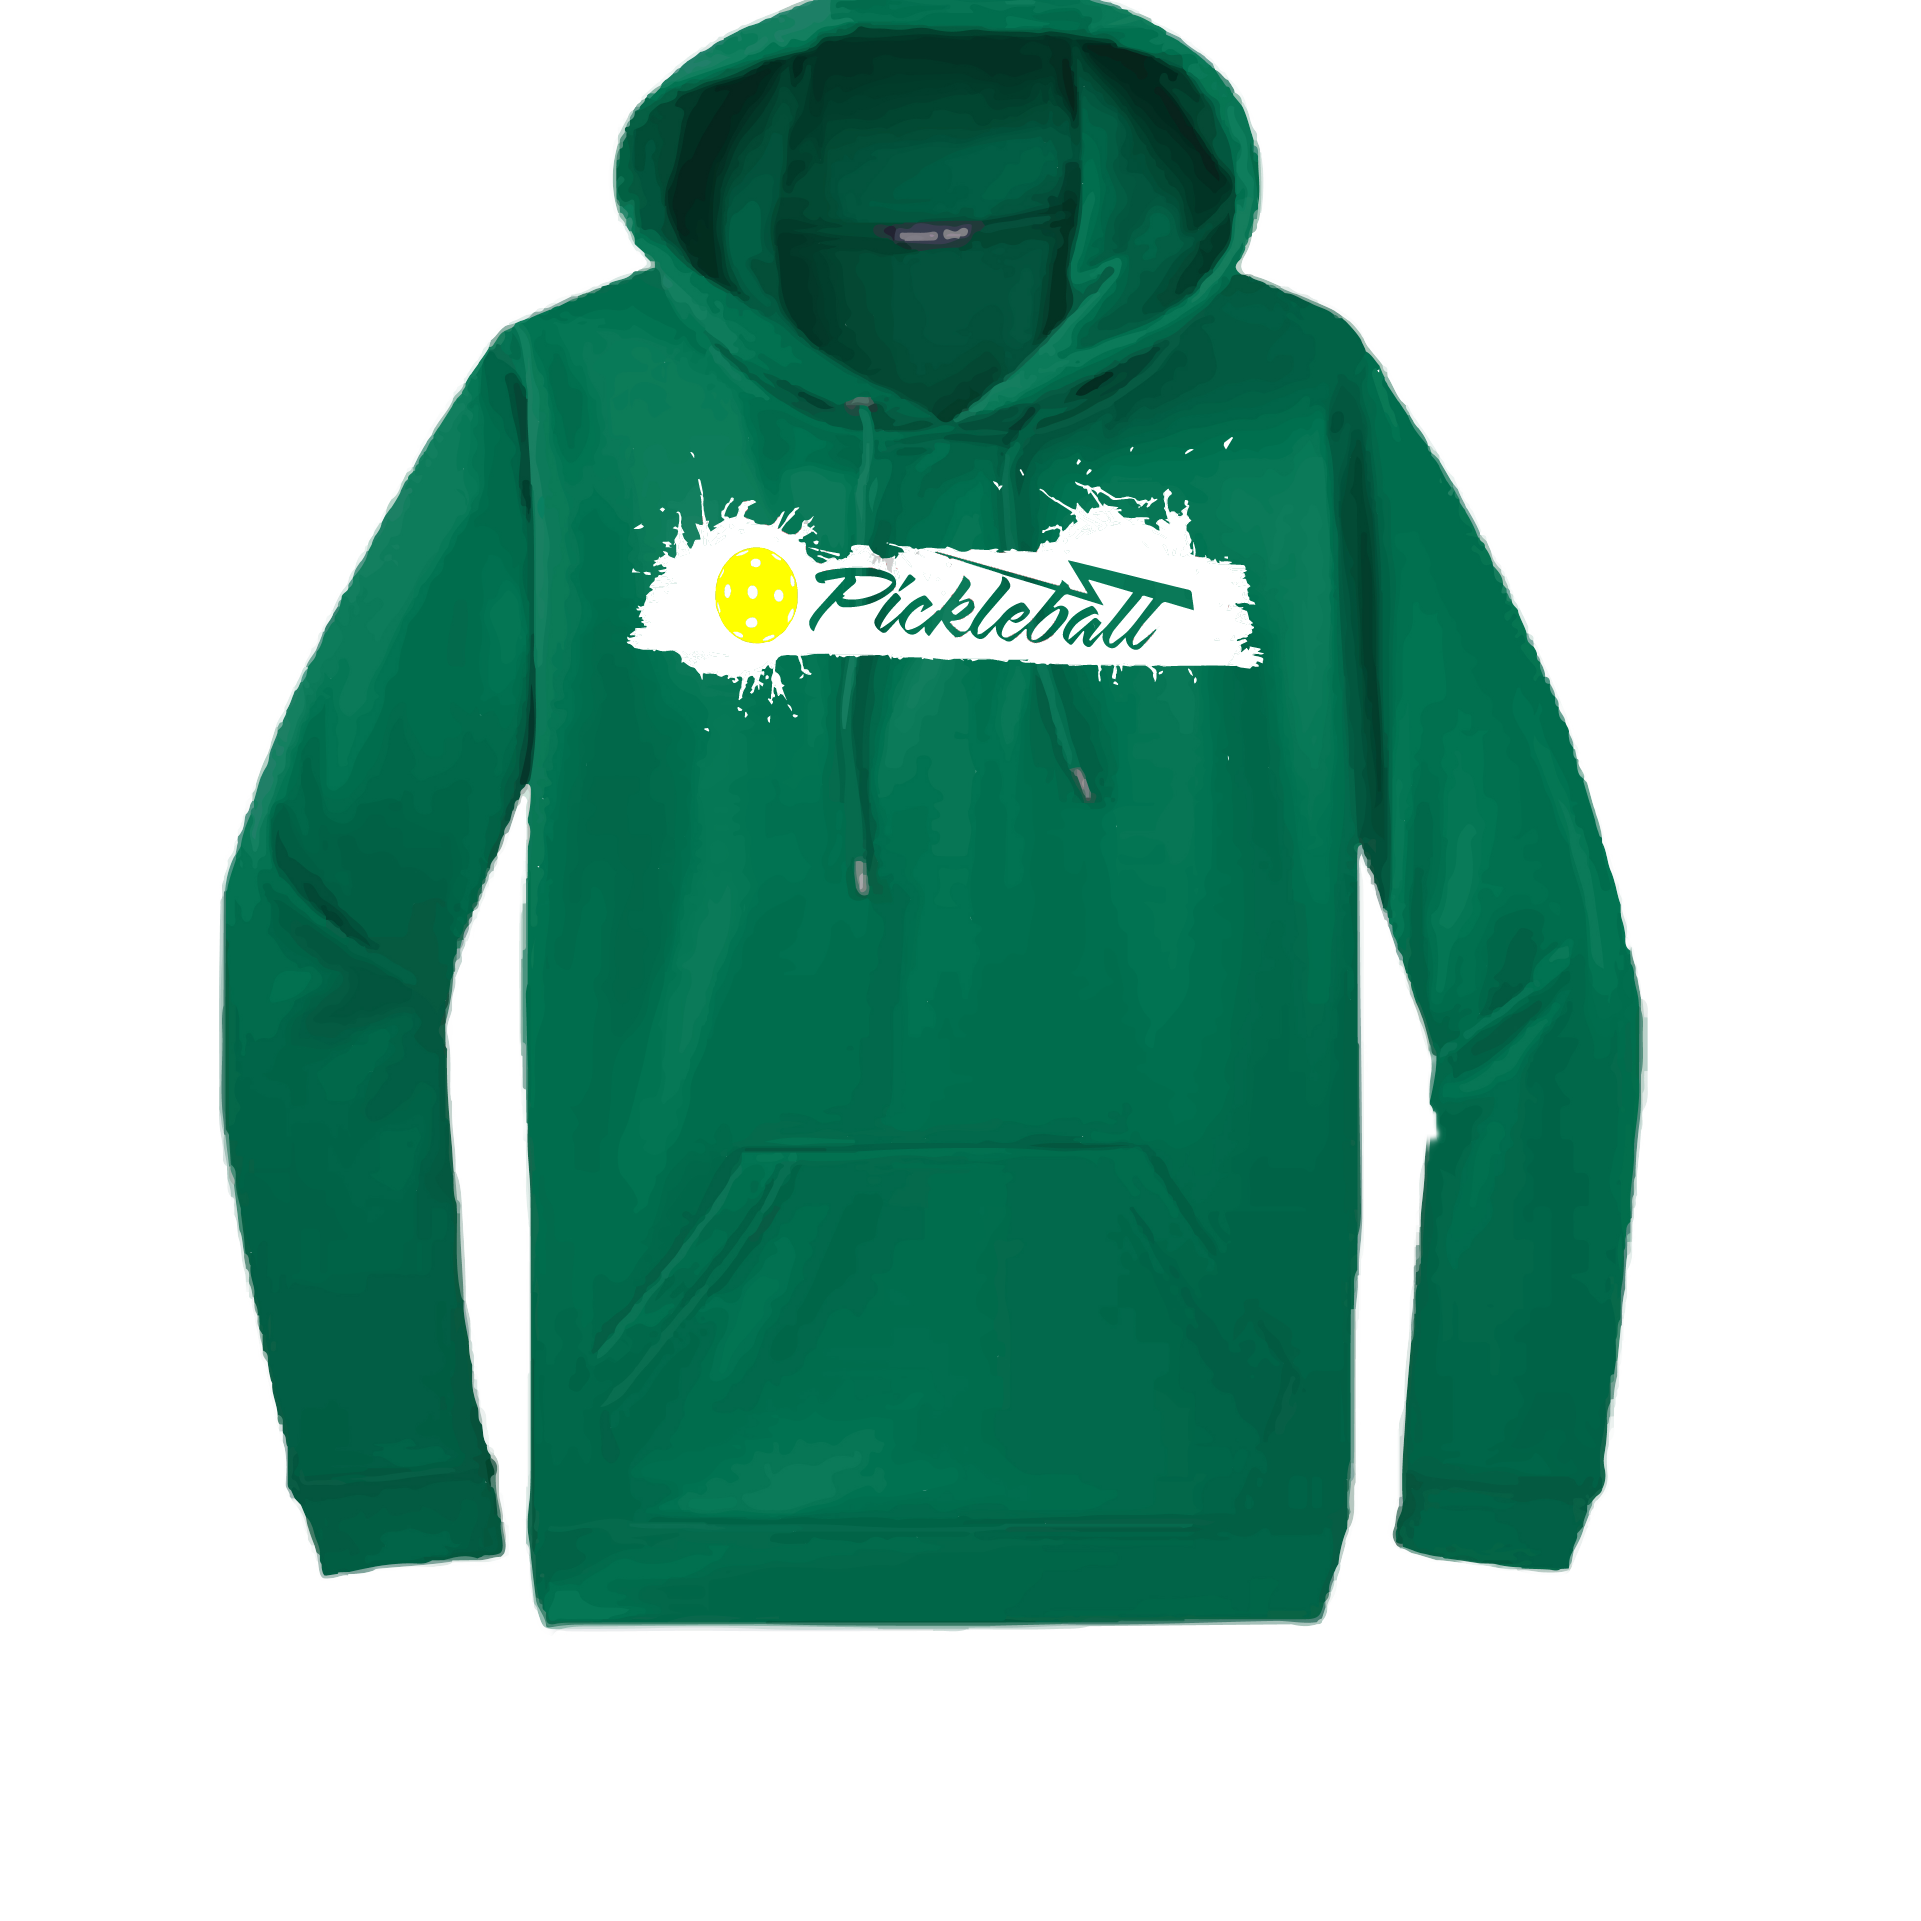 Pickleball Design: Extreme  Unisex Hooded Sweatshirt: Moisture-wicking, double-lined hood, front pouch pocket.  This unisex hooded sweatshirt is ultra comfortable and soft. Stay warm on the Pickleball courts while being that hit with this one of kind design.